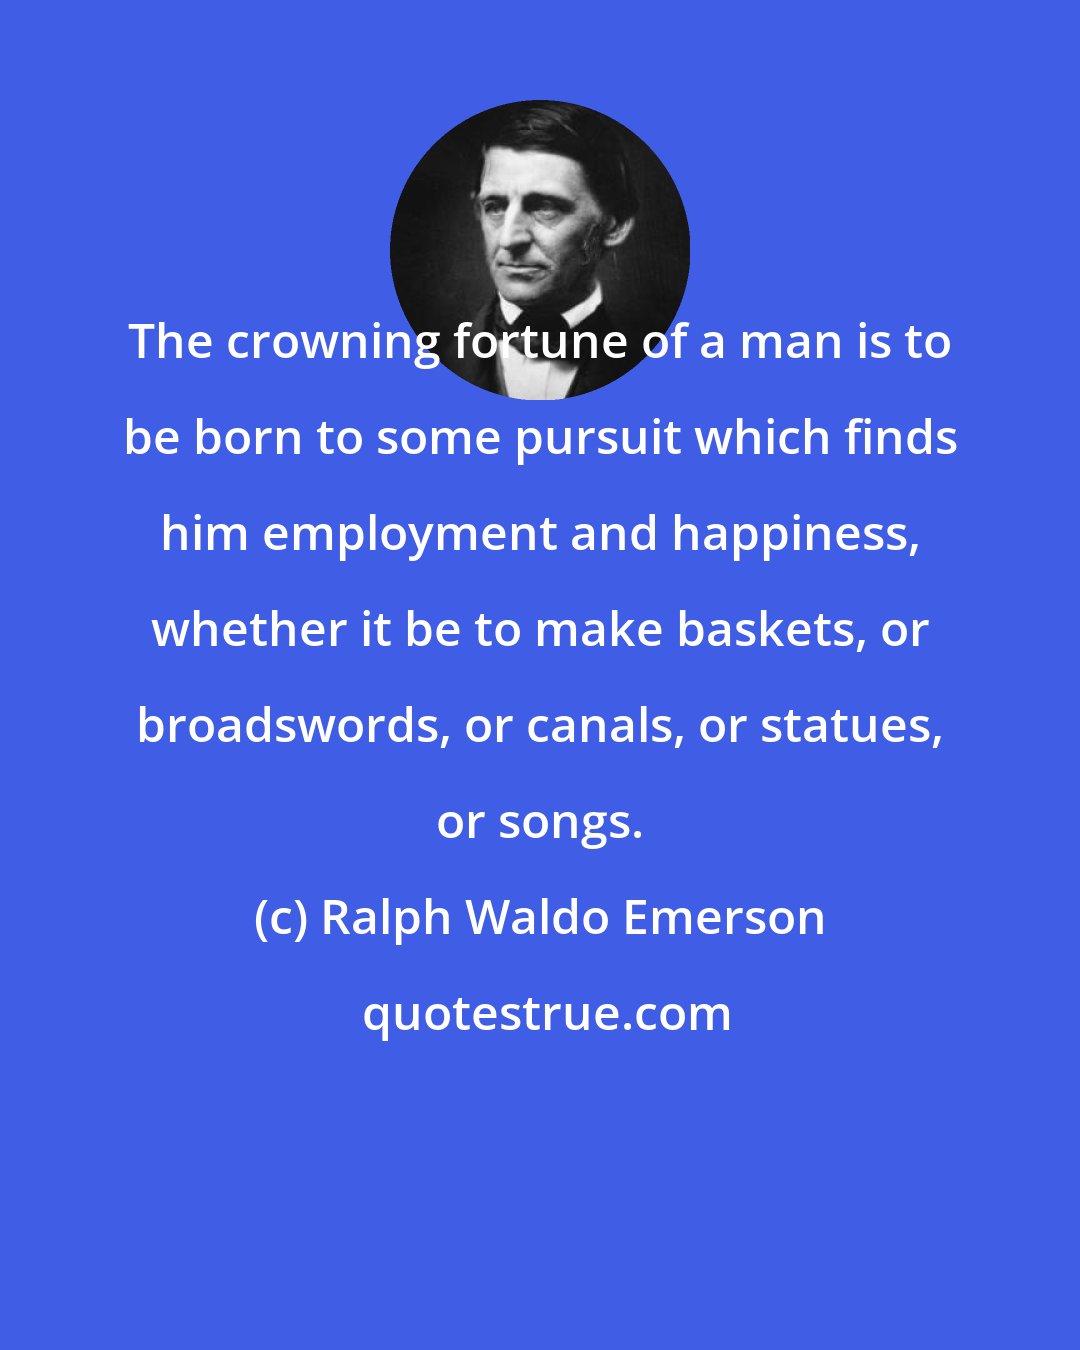 Ralph Waldo Emerson: The crowning fortune of a man is to be born to some pursuit which finds him employment and happiness, whether it be to make baskets, or broadswords, or canals, or statues, or songs.